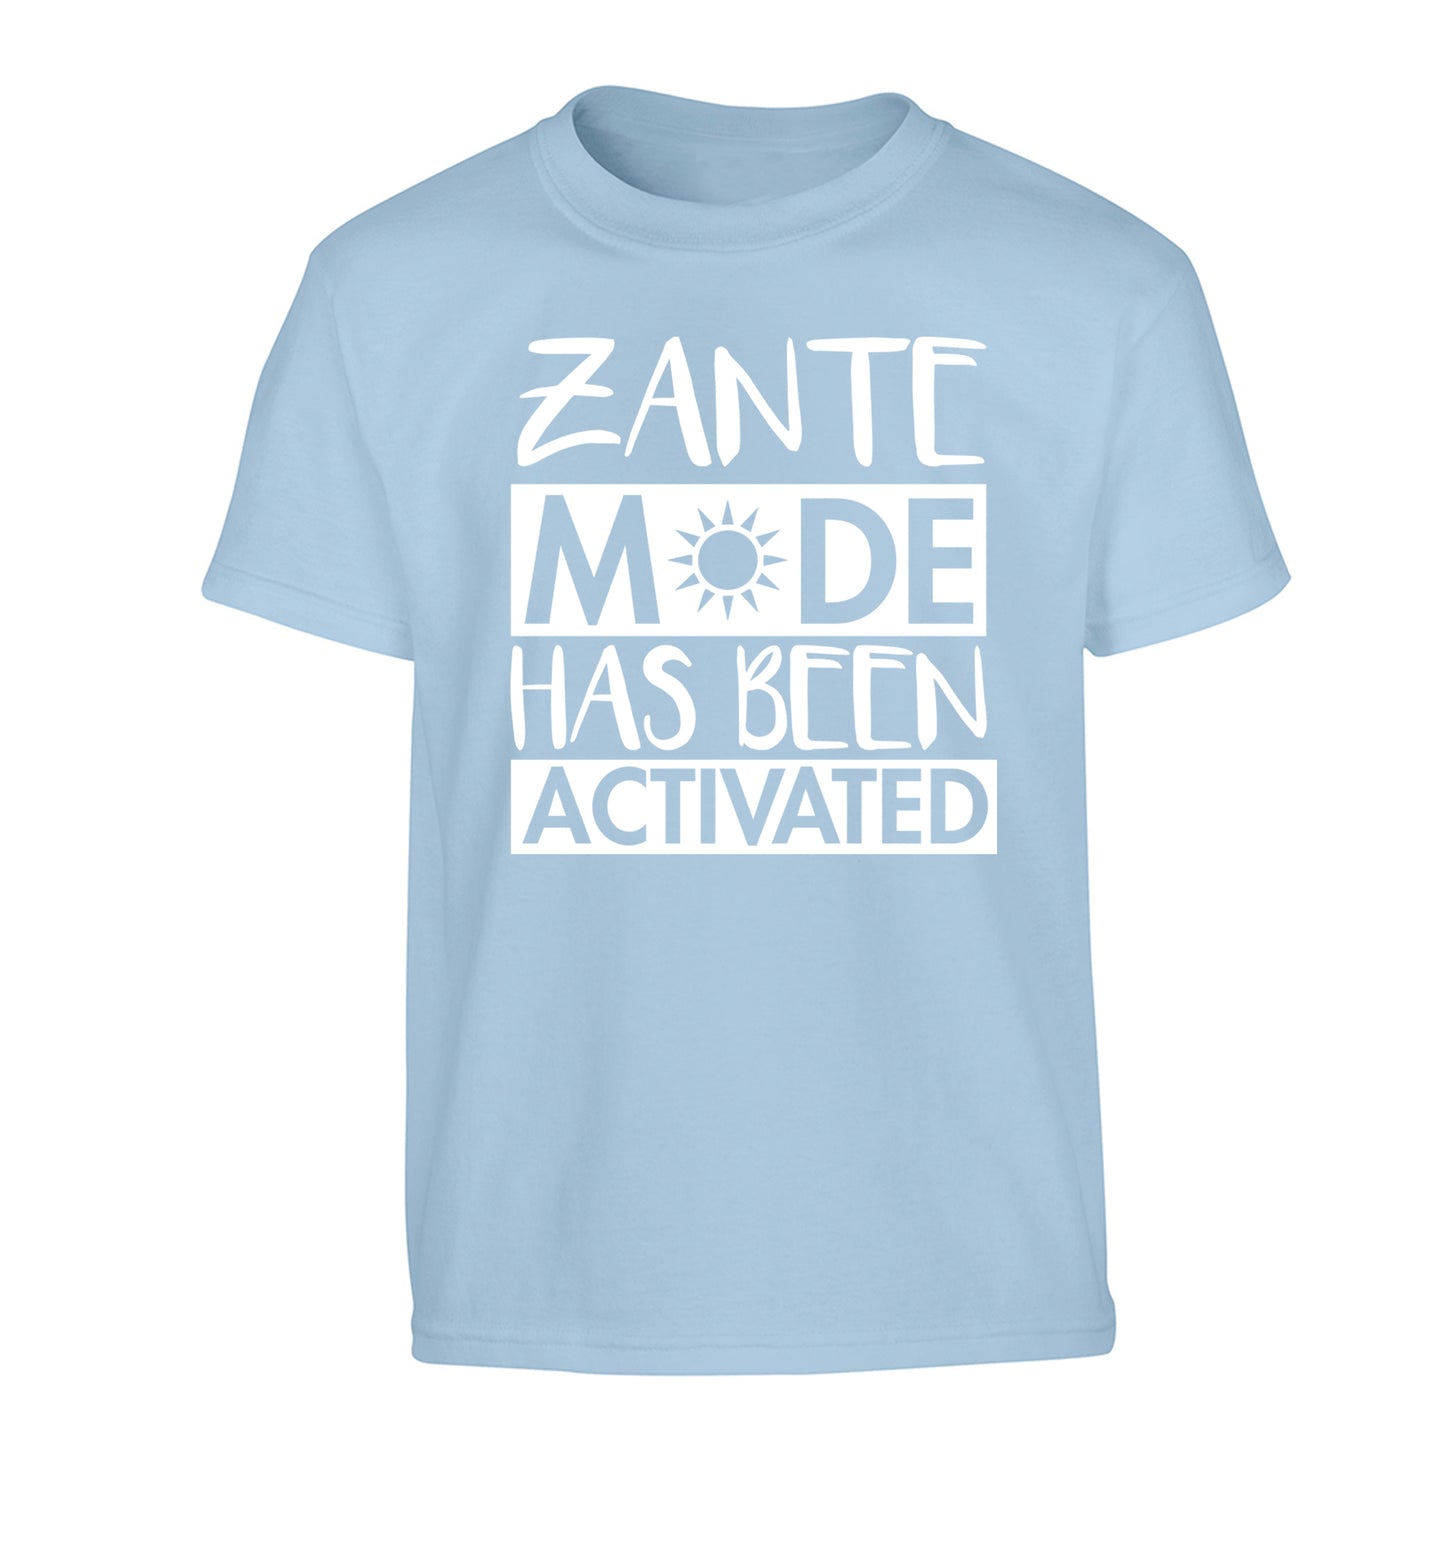 Zante mode has been activated Children's light blue Tshirt 12-13 Years